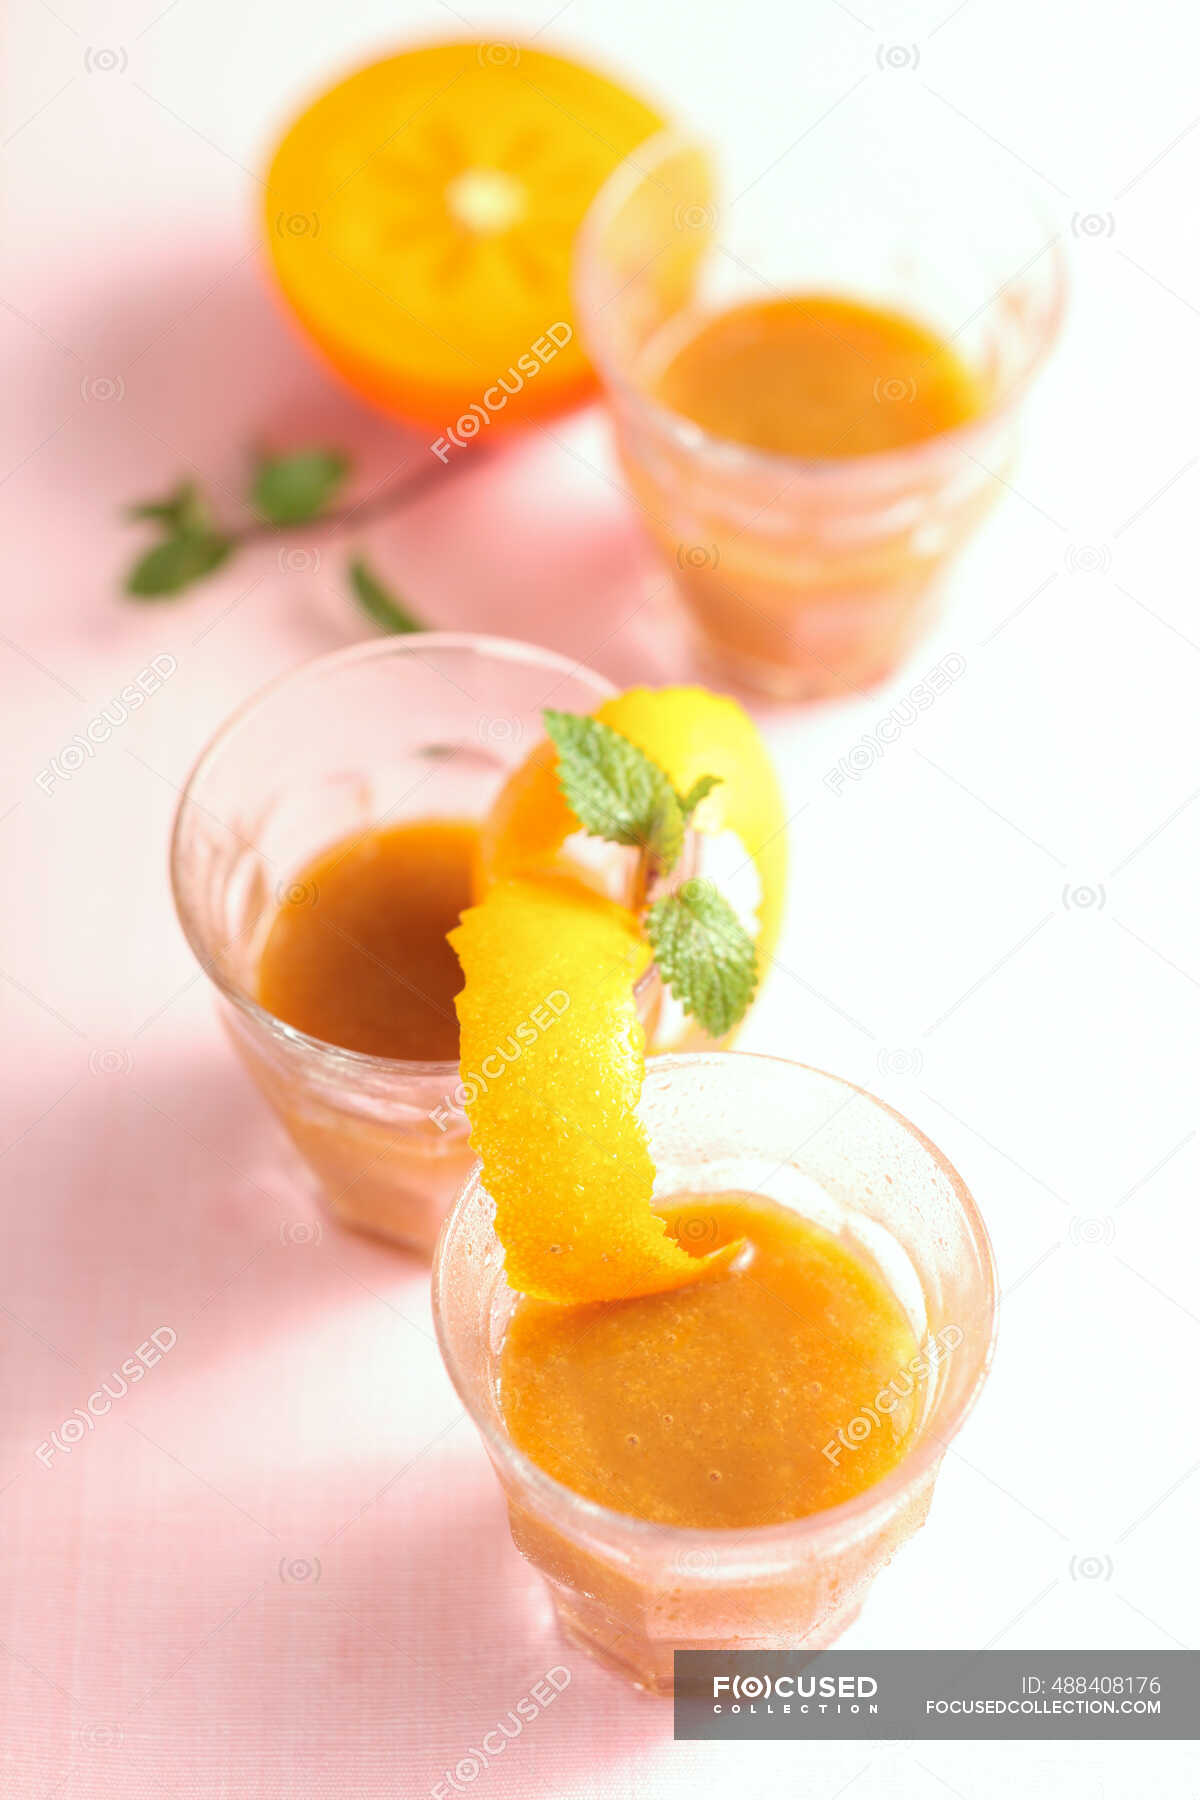 Persimmon and tamarillo smoothie with orange and ice — freshness, tasty -  Stock Photo | #488408176